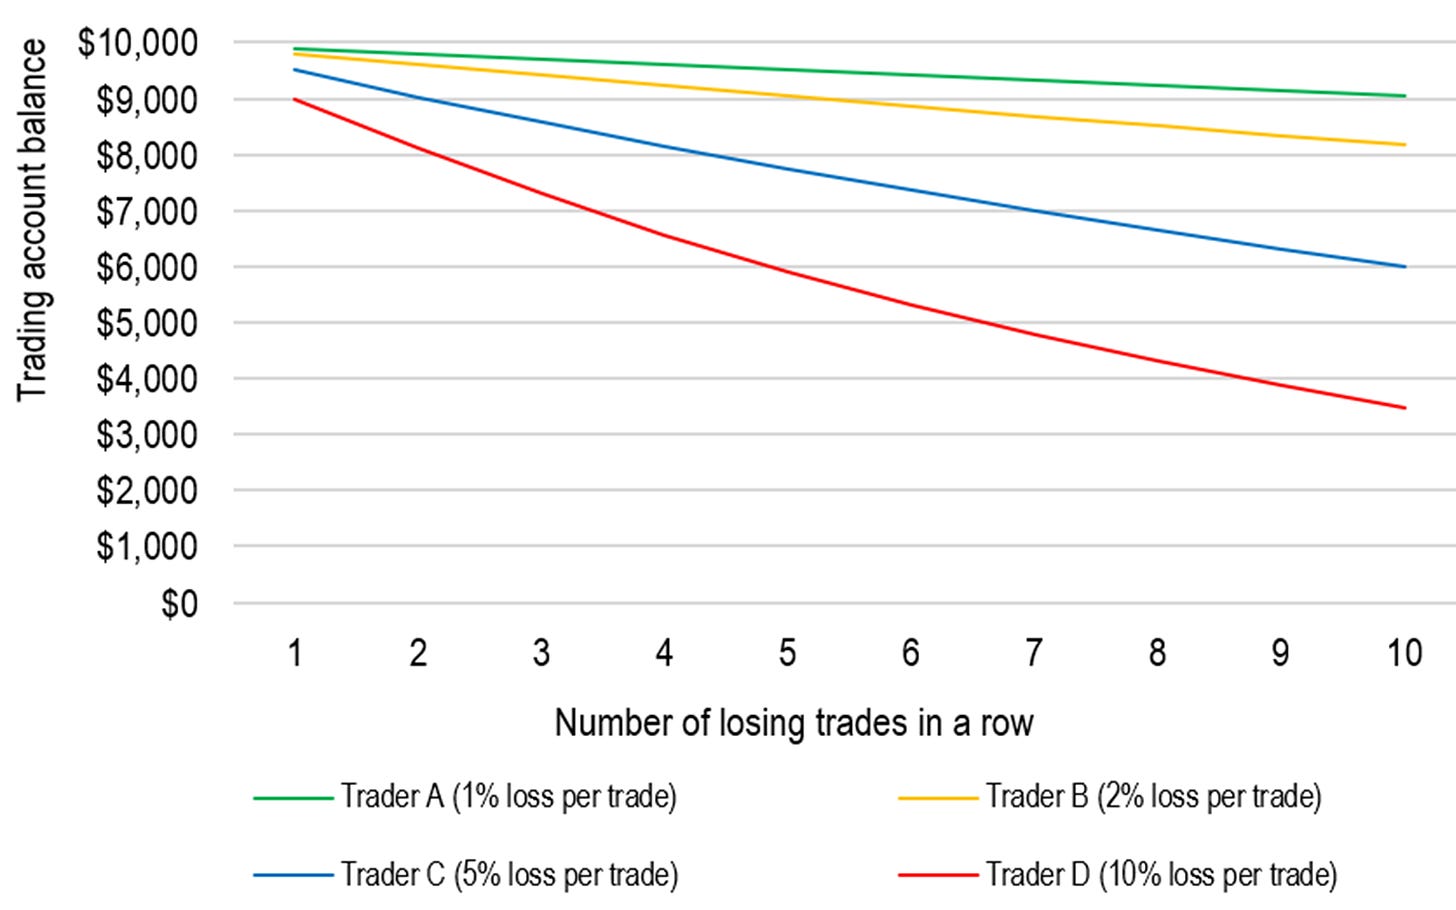 Account balance of traders starting with $10,000 after taking X number of losses in a row.